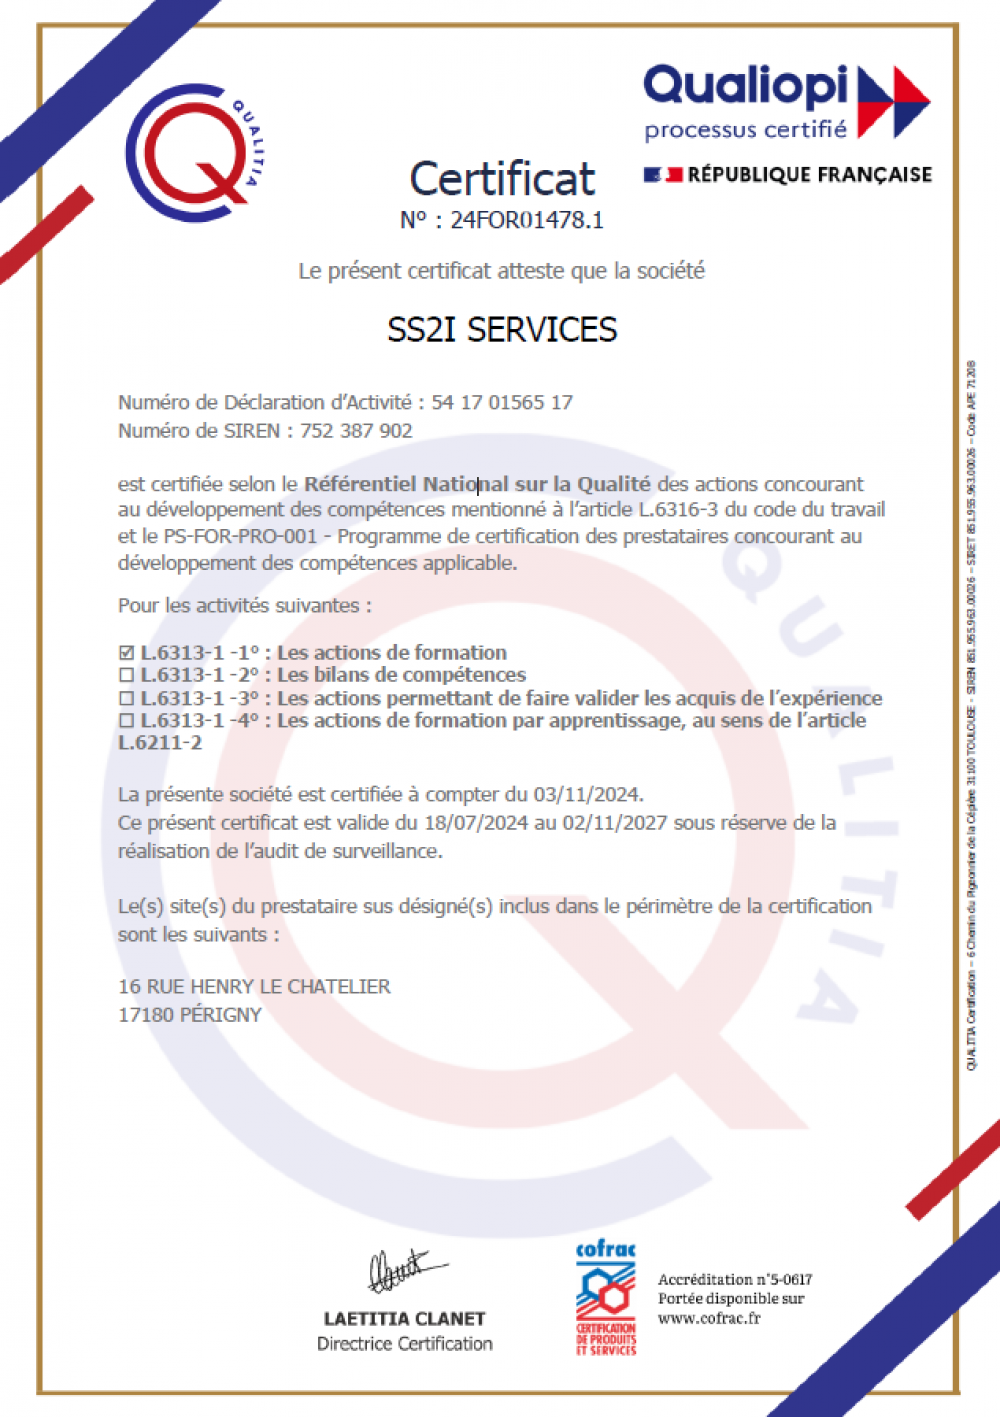 Certification Qualiopi SS2i Services